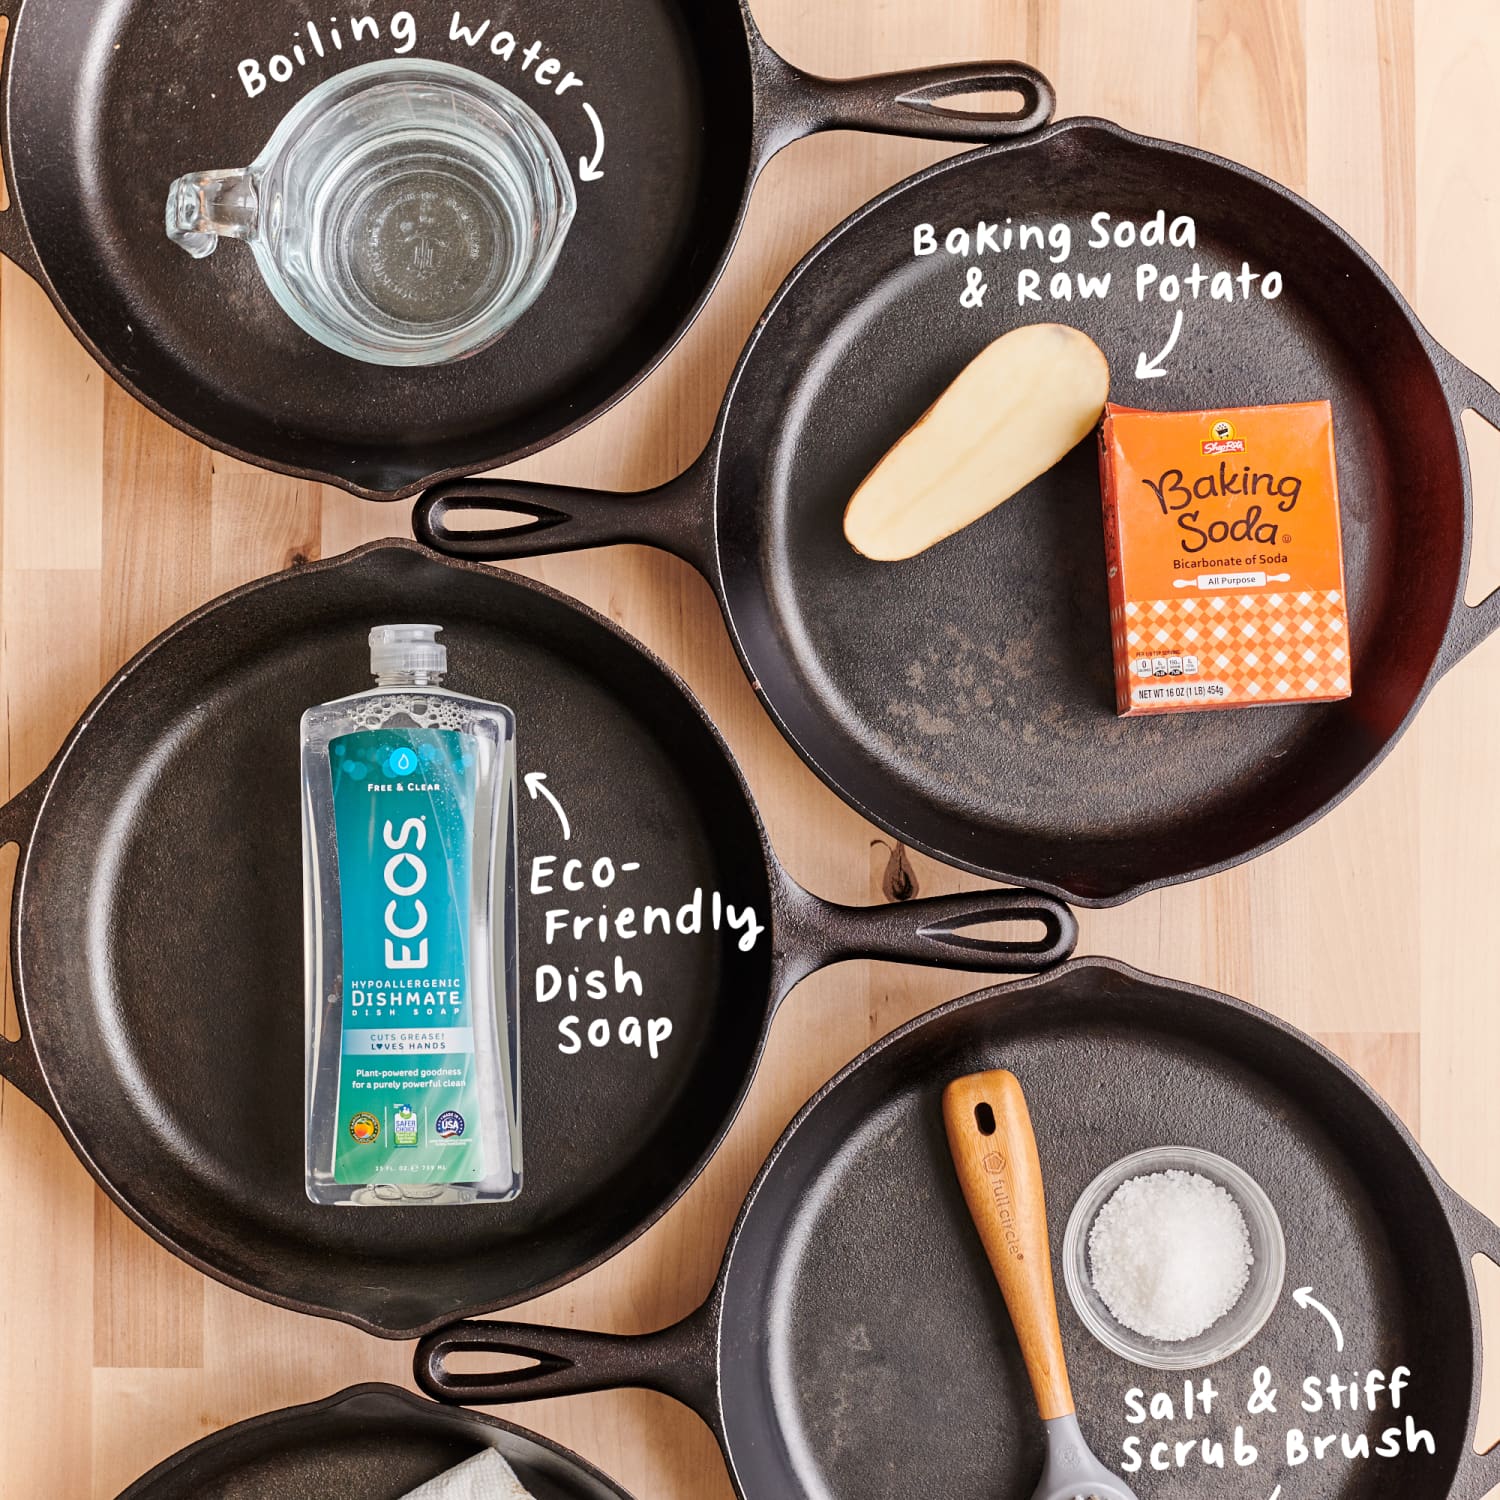 Ultimate Cast Iron Set: Seasoning Oil, Cleaning Soap & Restoring